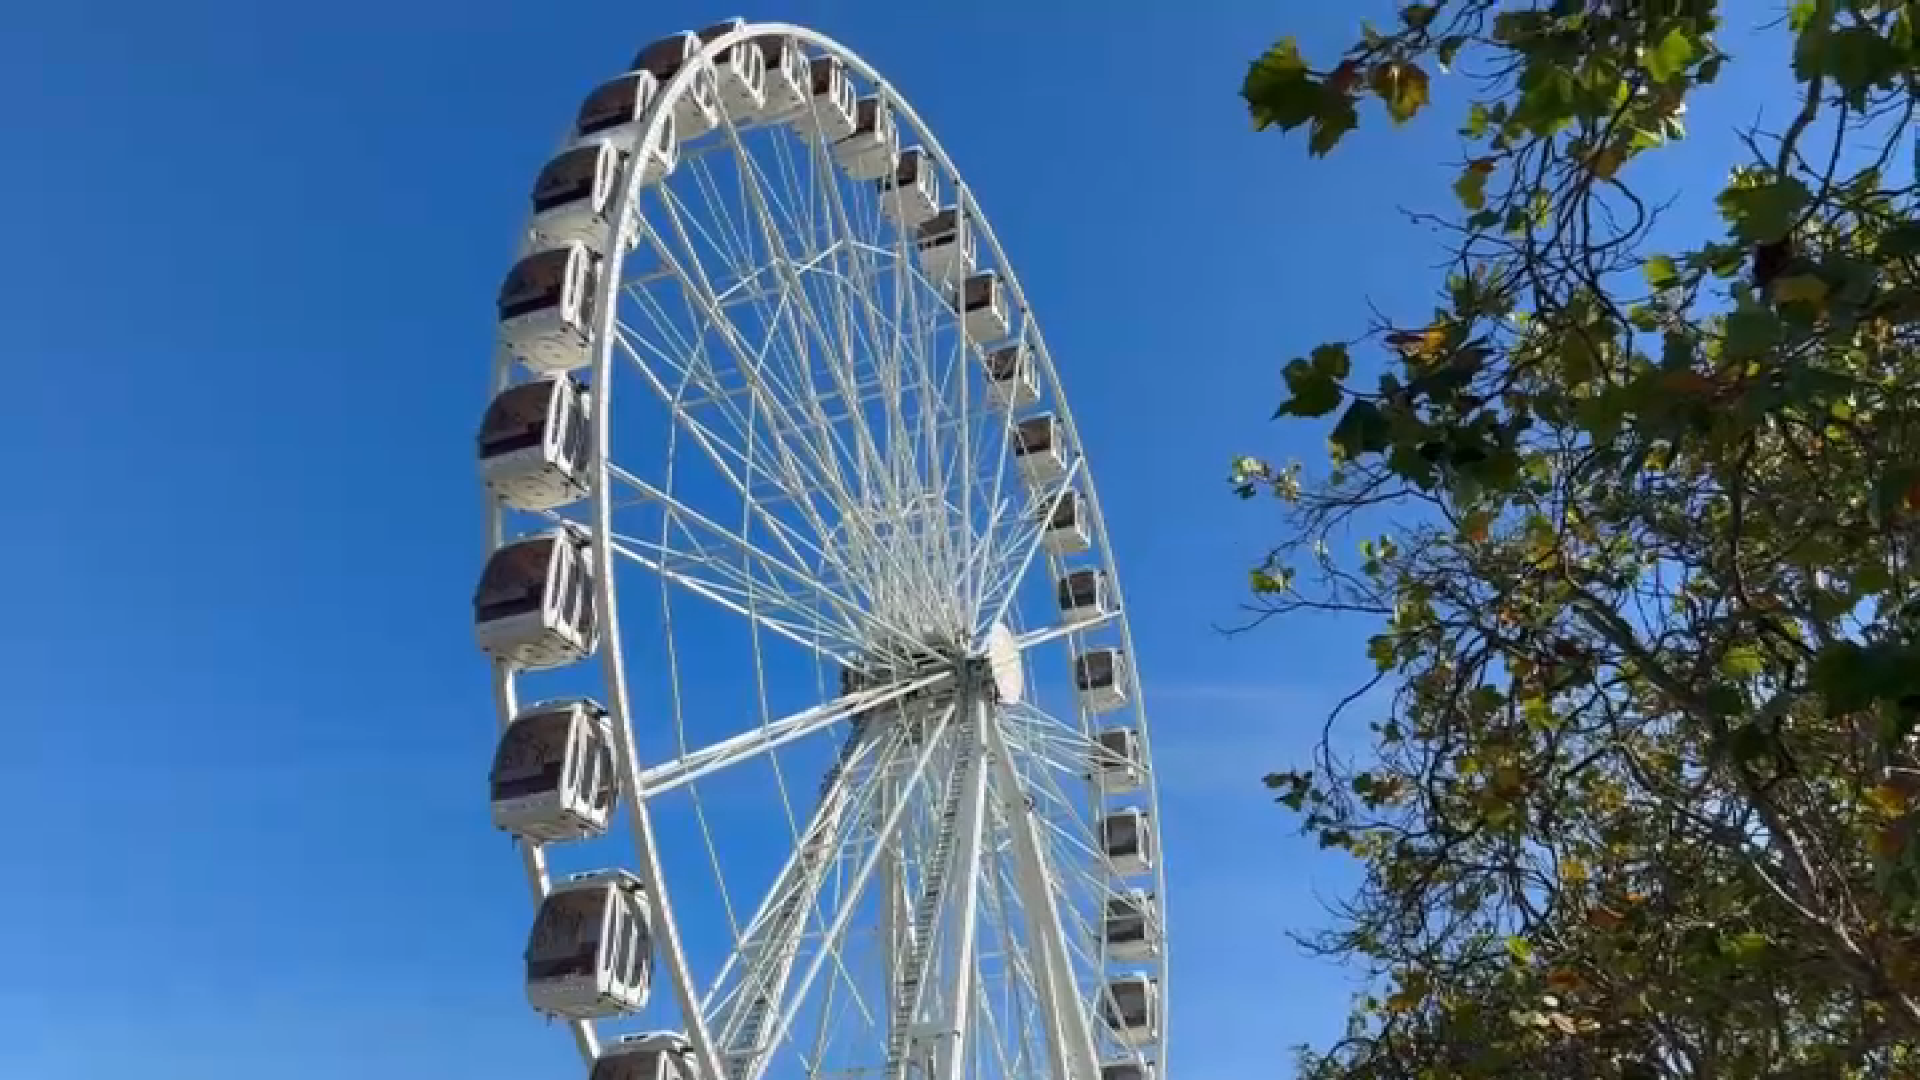 Ferris wheel at Golden Gate Park moved to Fisherman's Wharf – NBC